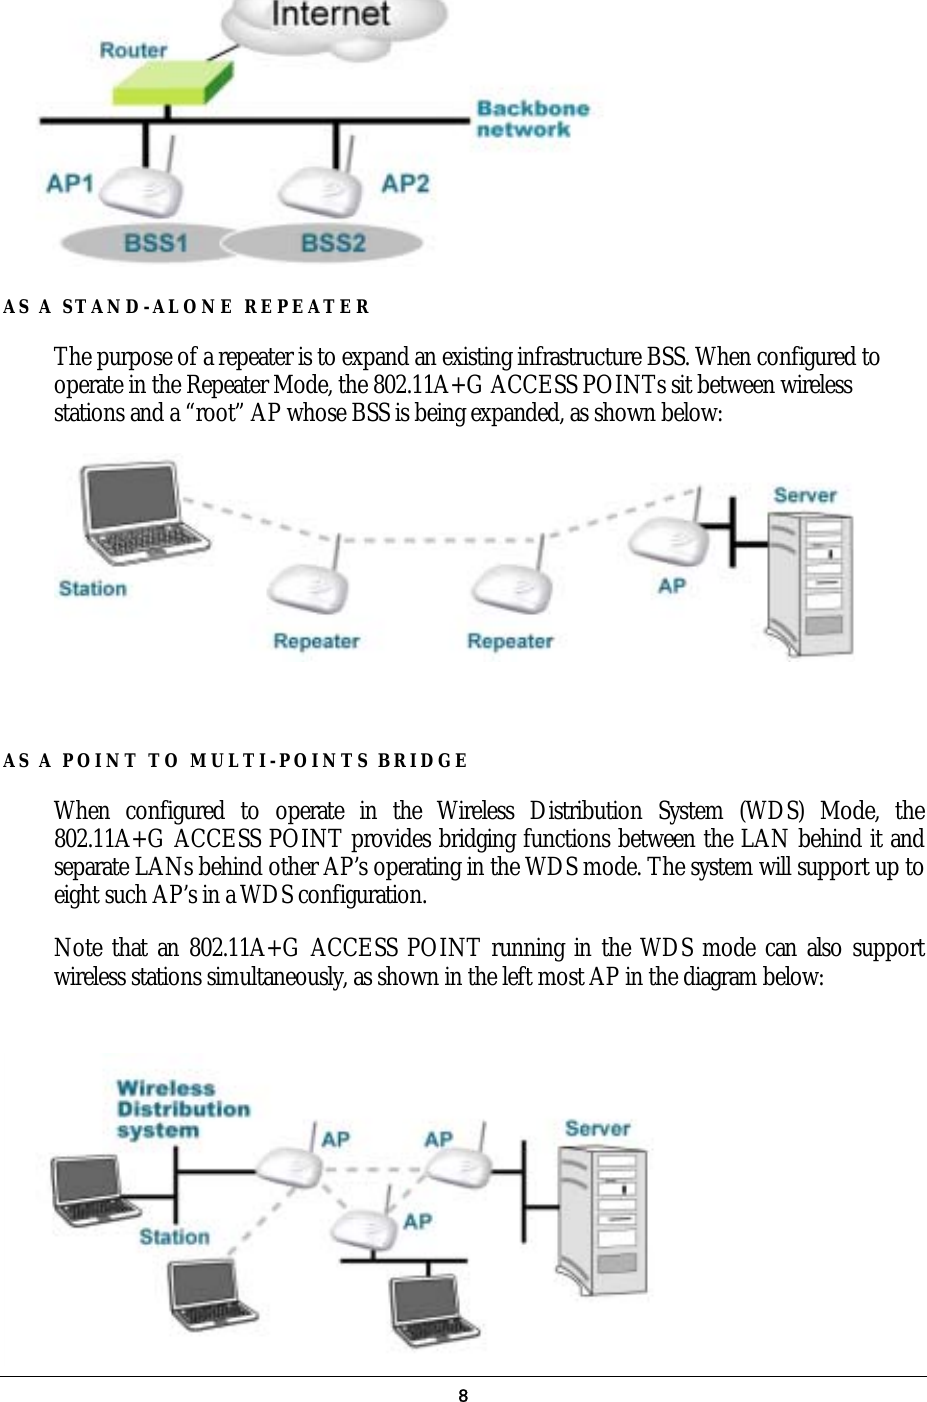   AS A STAND-ALONE REPEATER  The purpose of a repeater is to expand an existing infrastructure BSS. When configured to operate in the Repeater Mode, the 802.11A+G ACCESS POINTs sit between wireless stations and a “root” AP whose BSS is being expanded, as shown below:   AS A POINT TO MULTI-POINTS BRIDGE When configured to operate in the Wireless Distribution System (WDS) Mode, the 802.11A+G ACCESS POINT provides bridging functions between the LAN behind it and separate LANs behind other AP’s operating in the WDS mode. The system will support up to eight such AP’s in a WDS configuration. Note that an 802.11A+G ACCESS POINT running in the WDS mode can also support wireless stations simultaneously, as shown in the left most AP in the diagram below:     8